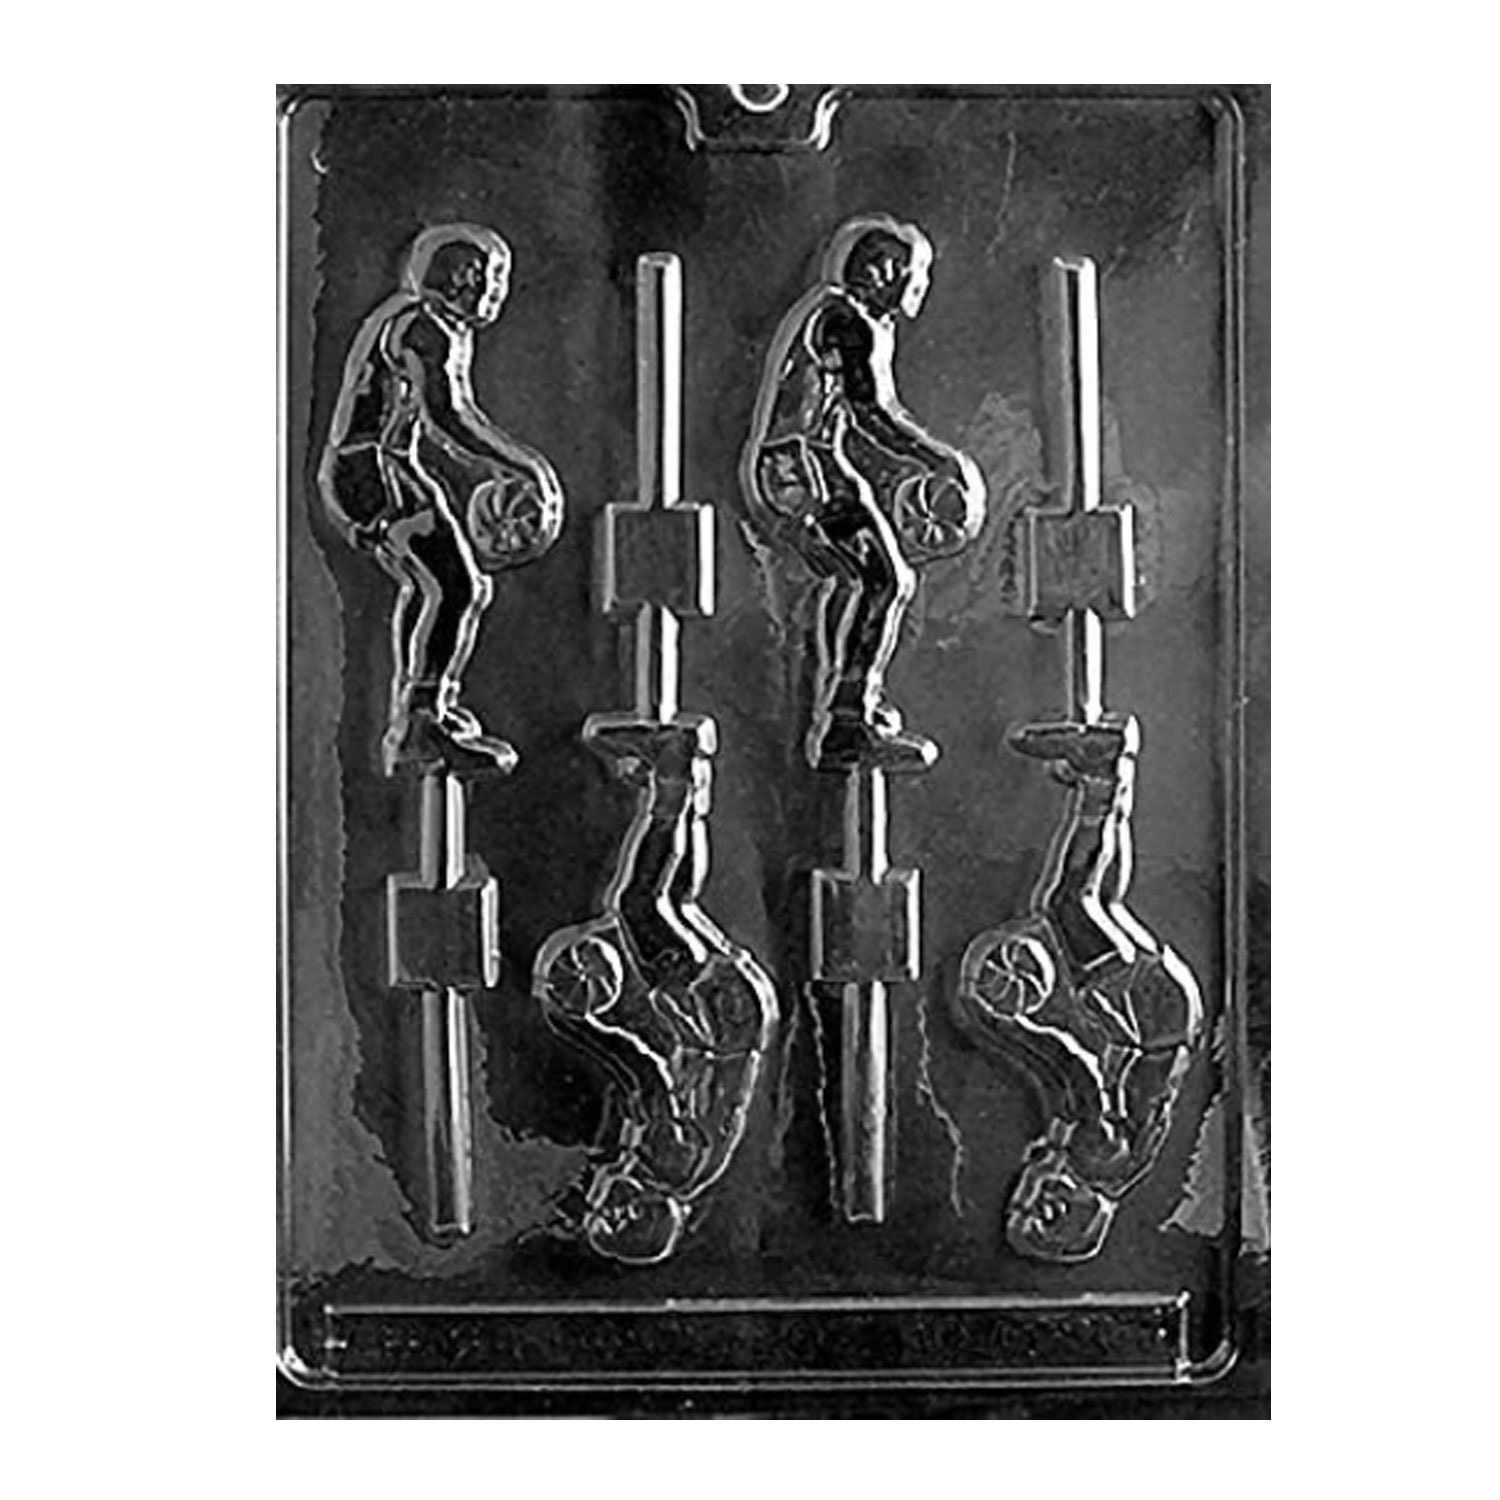 BASKETBALL PLAYER Lolly Sucker Chocolate Candy Mold Craft 